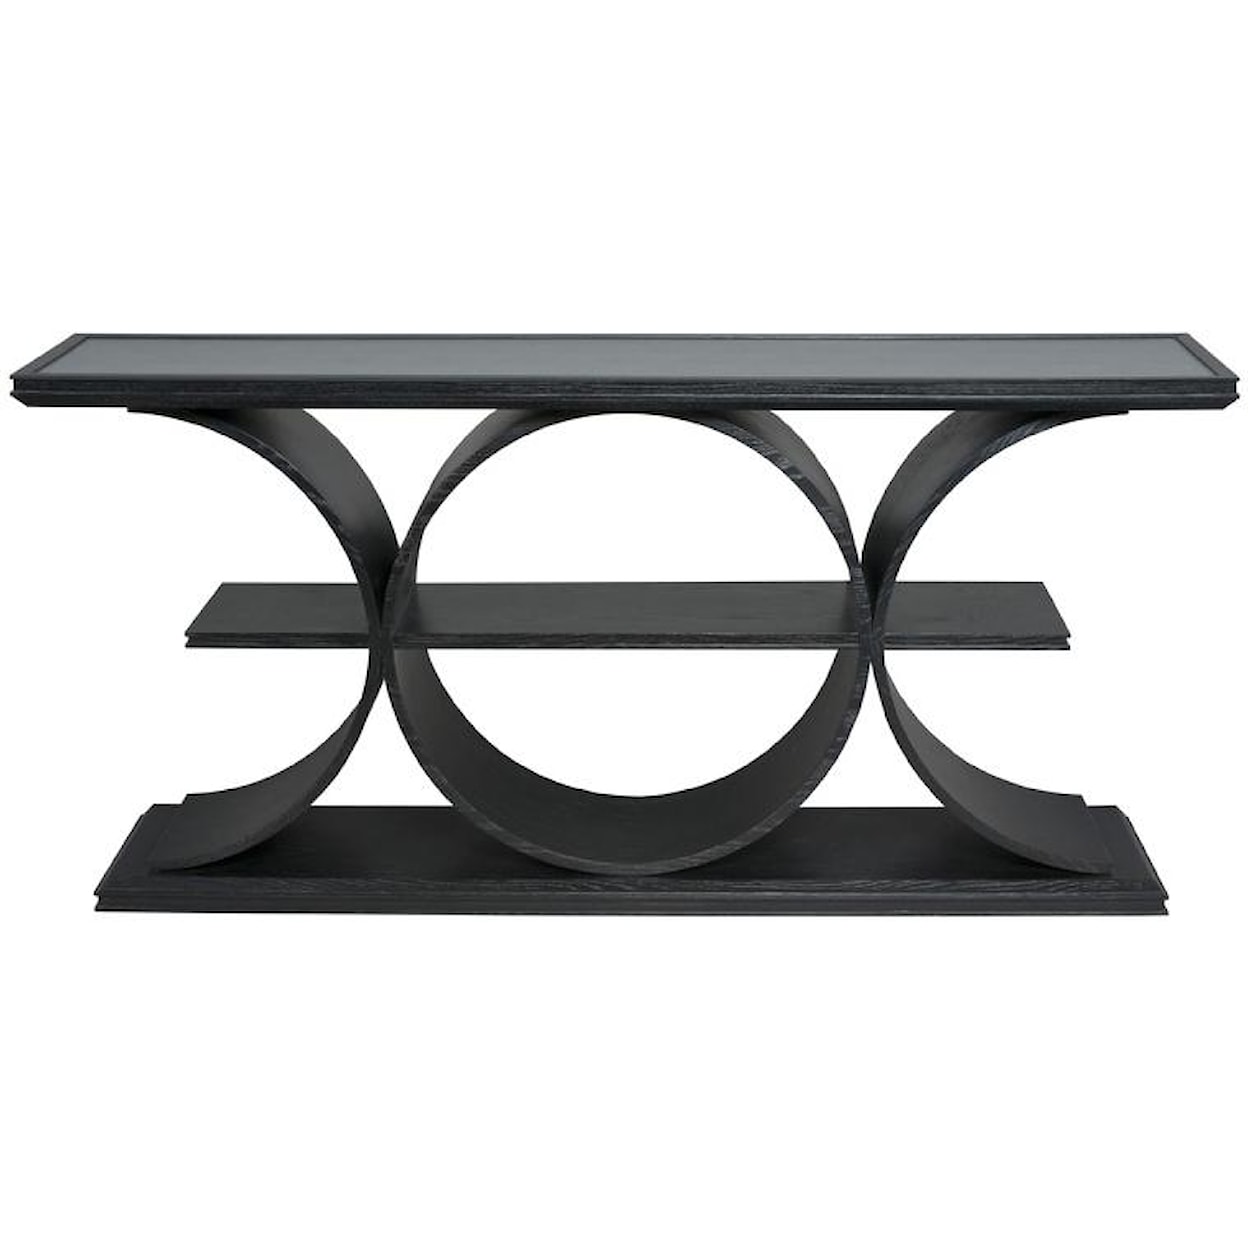 Vanguard Furniture Thom Filicia Home Collection Console Table